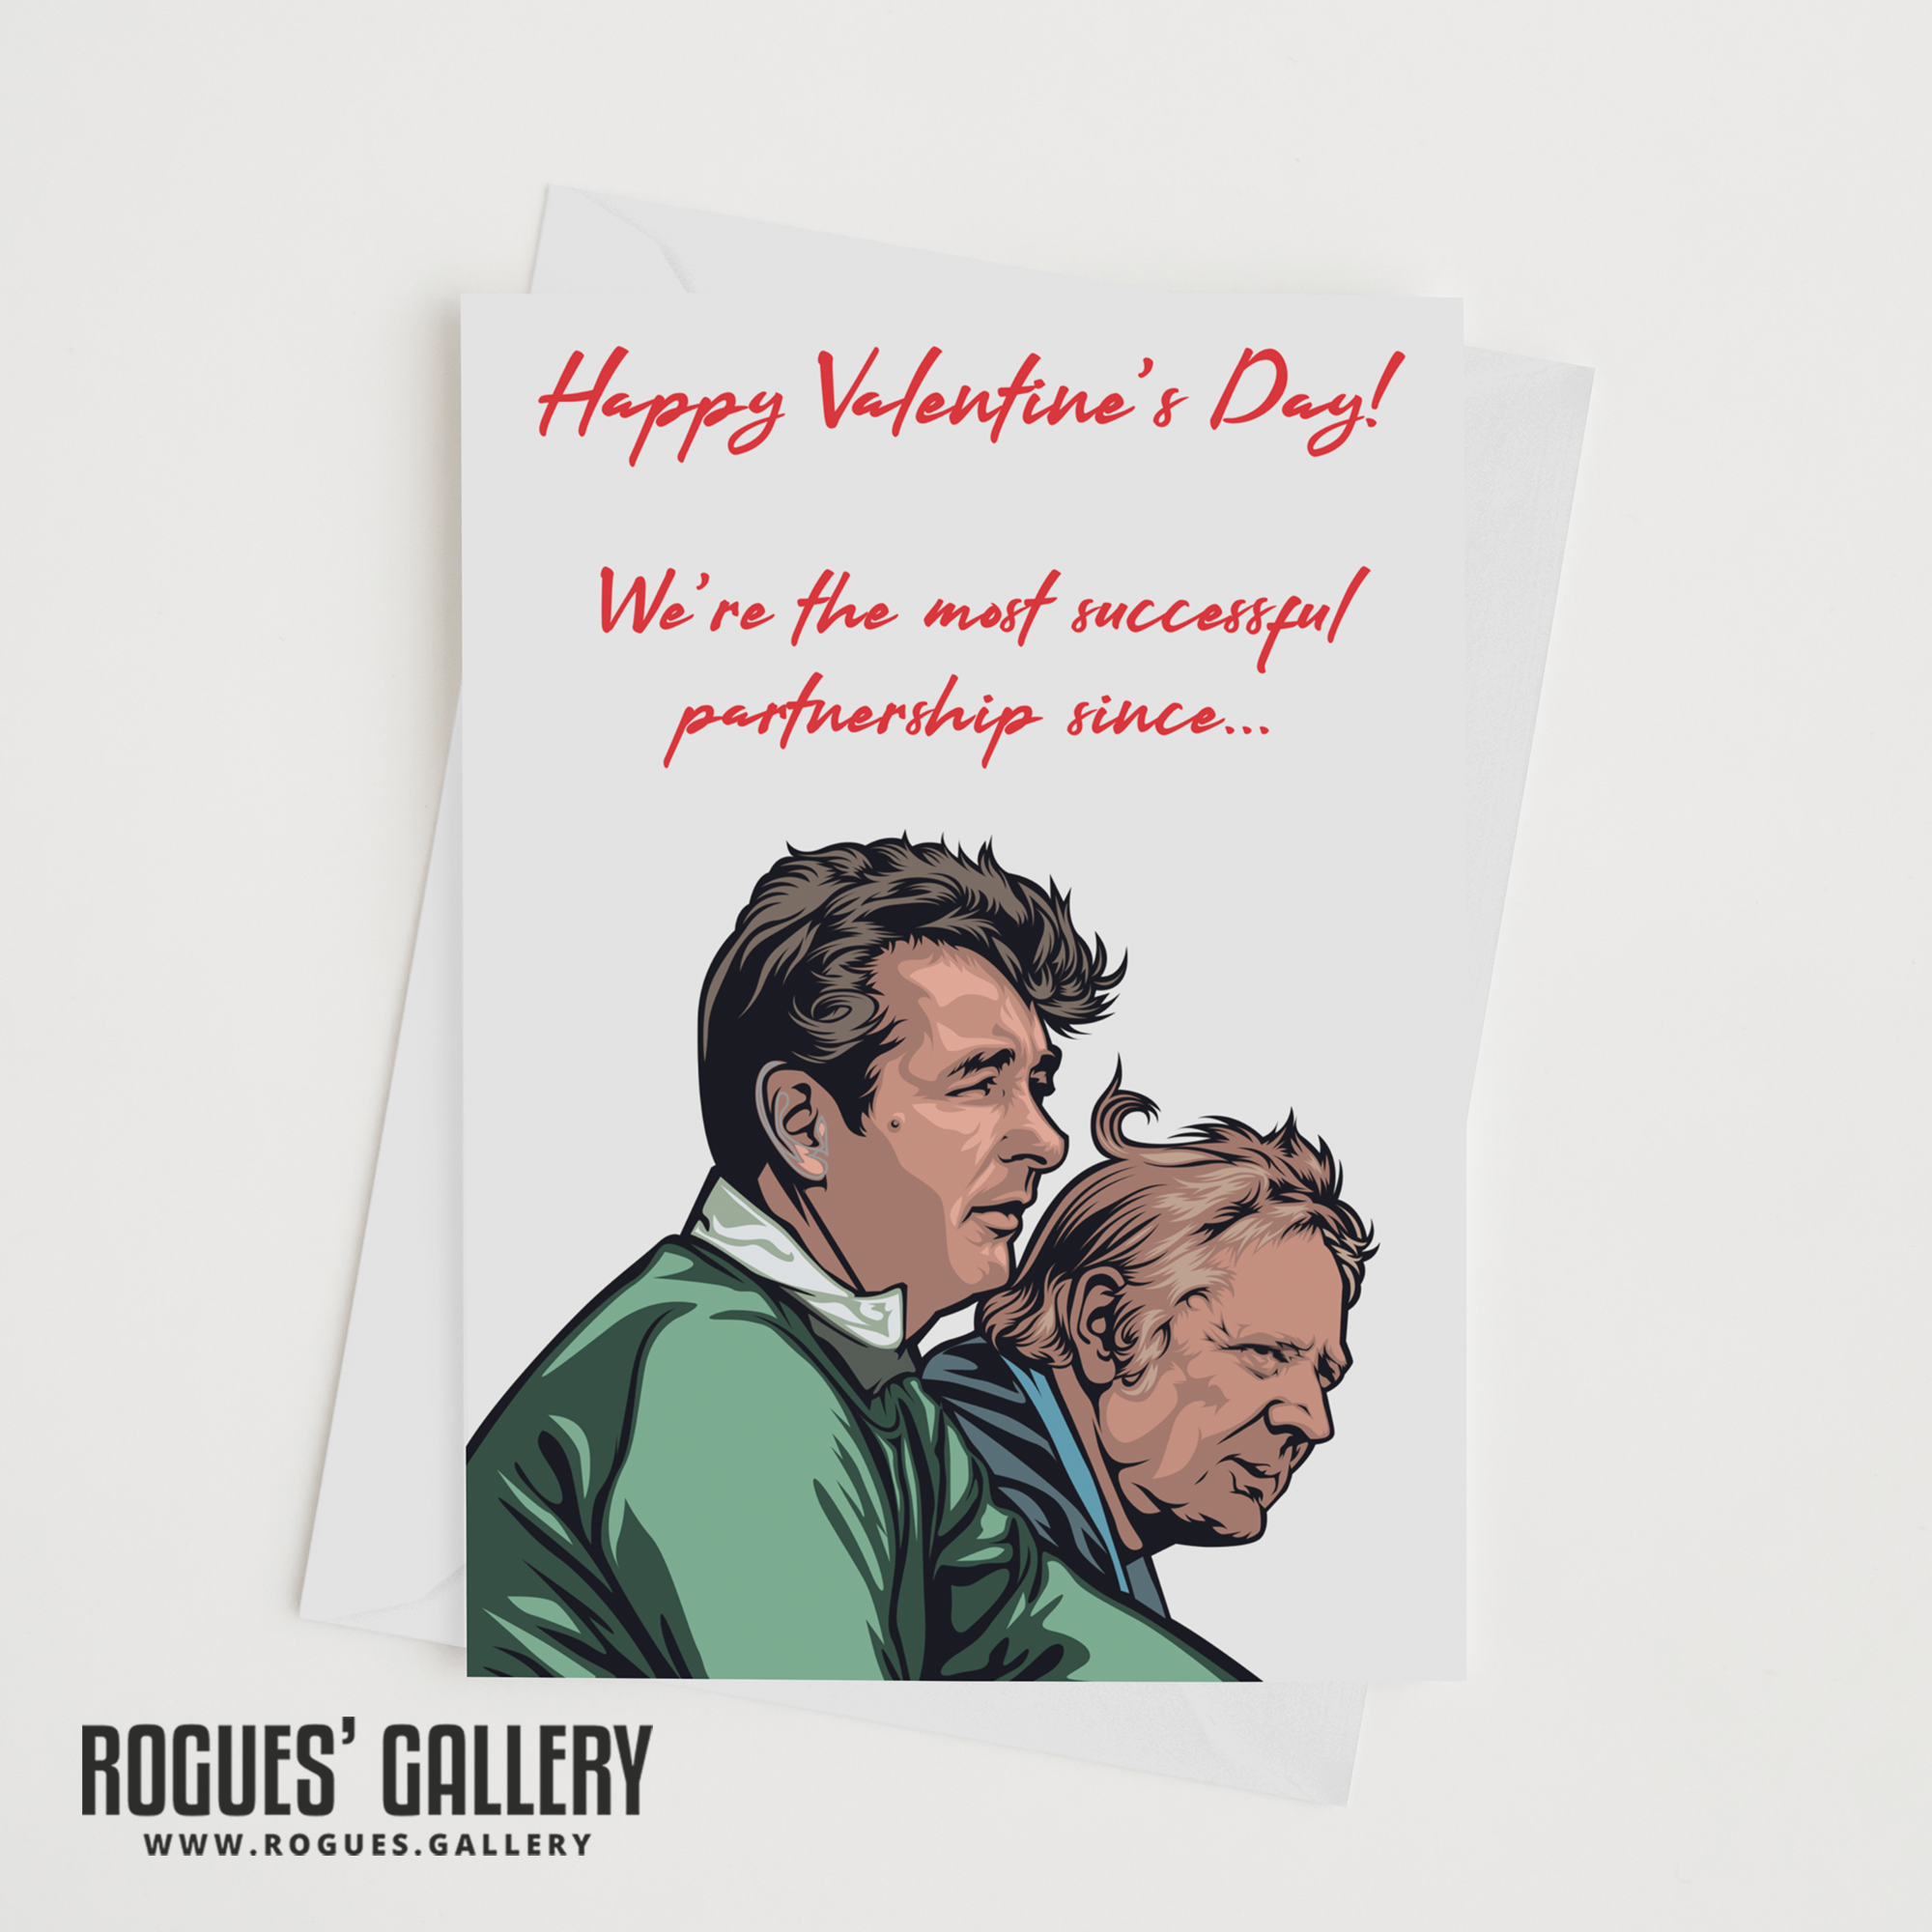 Brian Clough Peter Taylor Nottingham Forest FC partnership City Ground Valentines Card NFFC City Ground